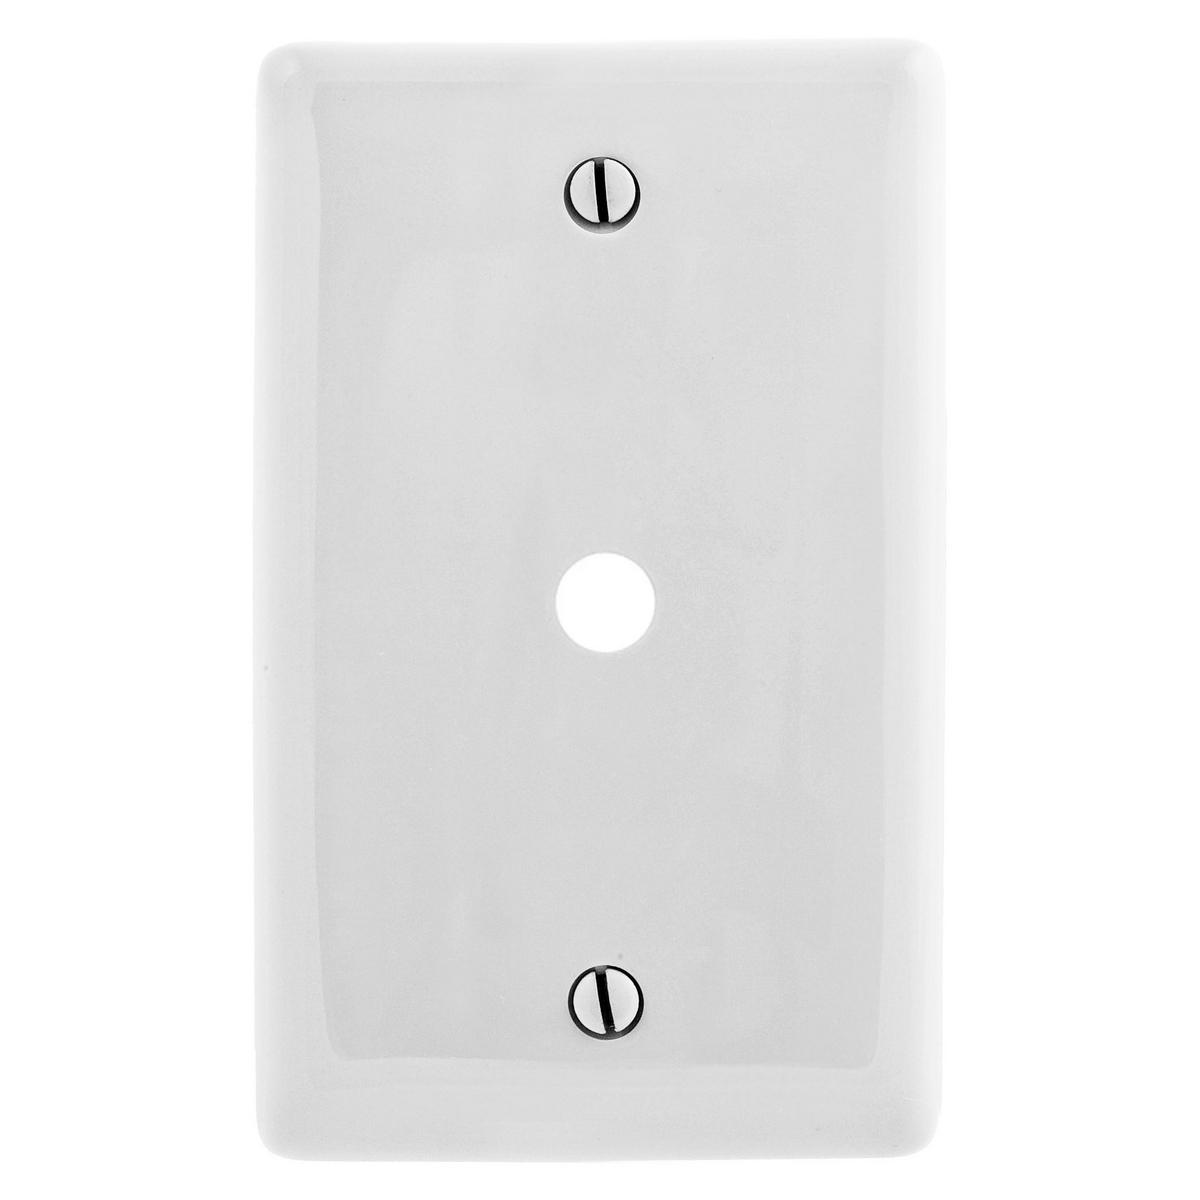 Hubbell NP11W Wallplates and Box Covers, Wallplate, Nylon, 1-Gang, .406" Opening, Box Mount, White  ; Reinforcement ribs for extra strength ; High-impact, self-extinguishing nylon material ; Captive screw feature holds mounting screw in place ; Standard Size is 1/8" la